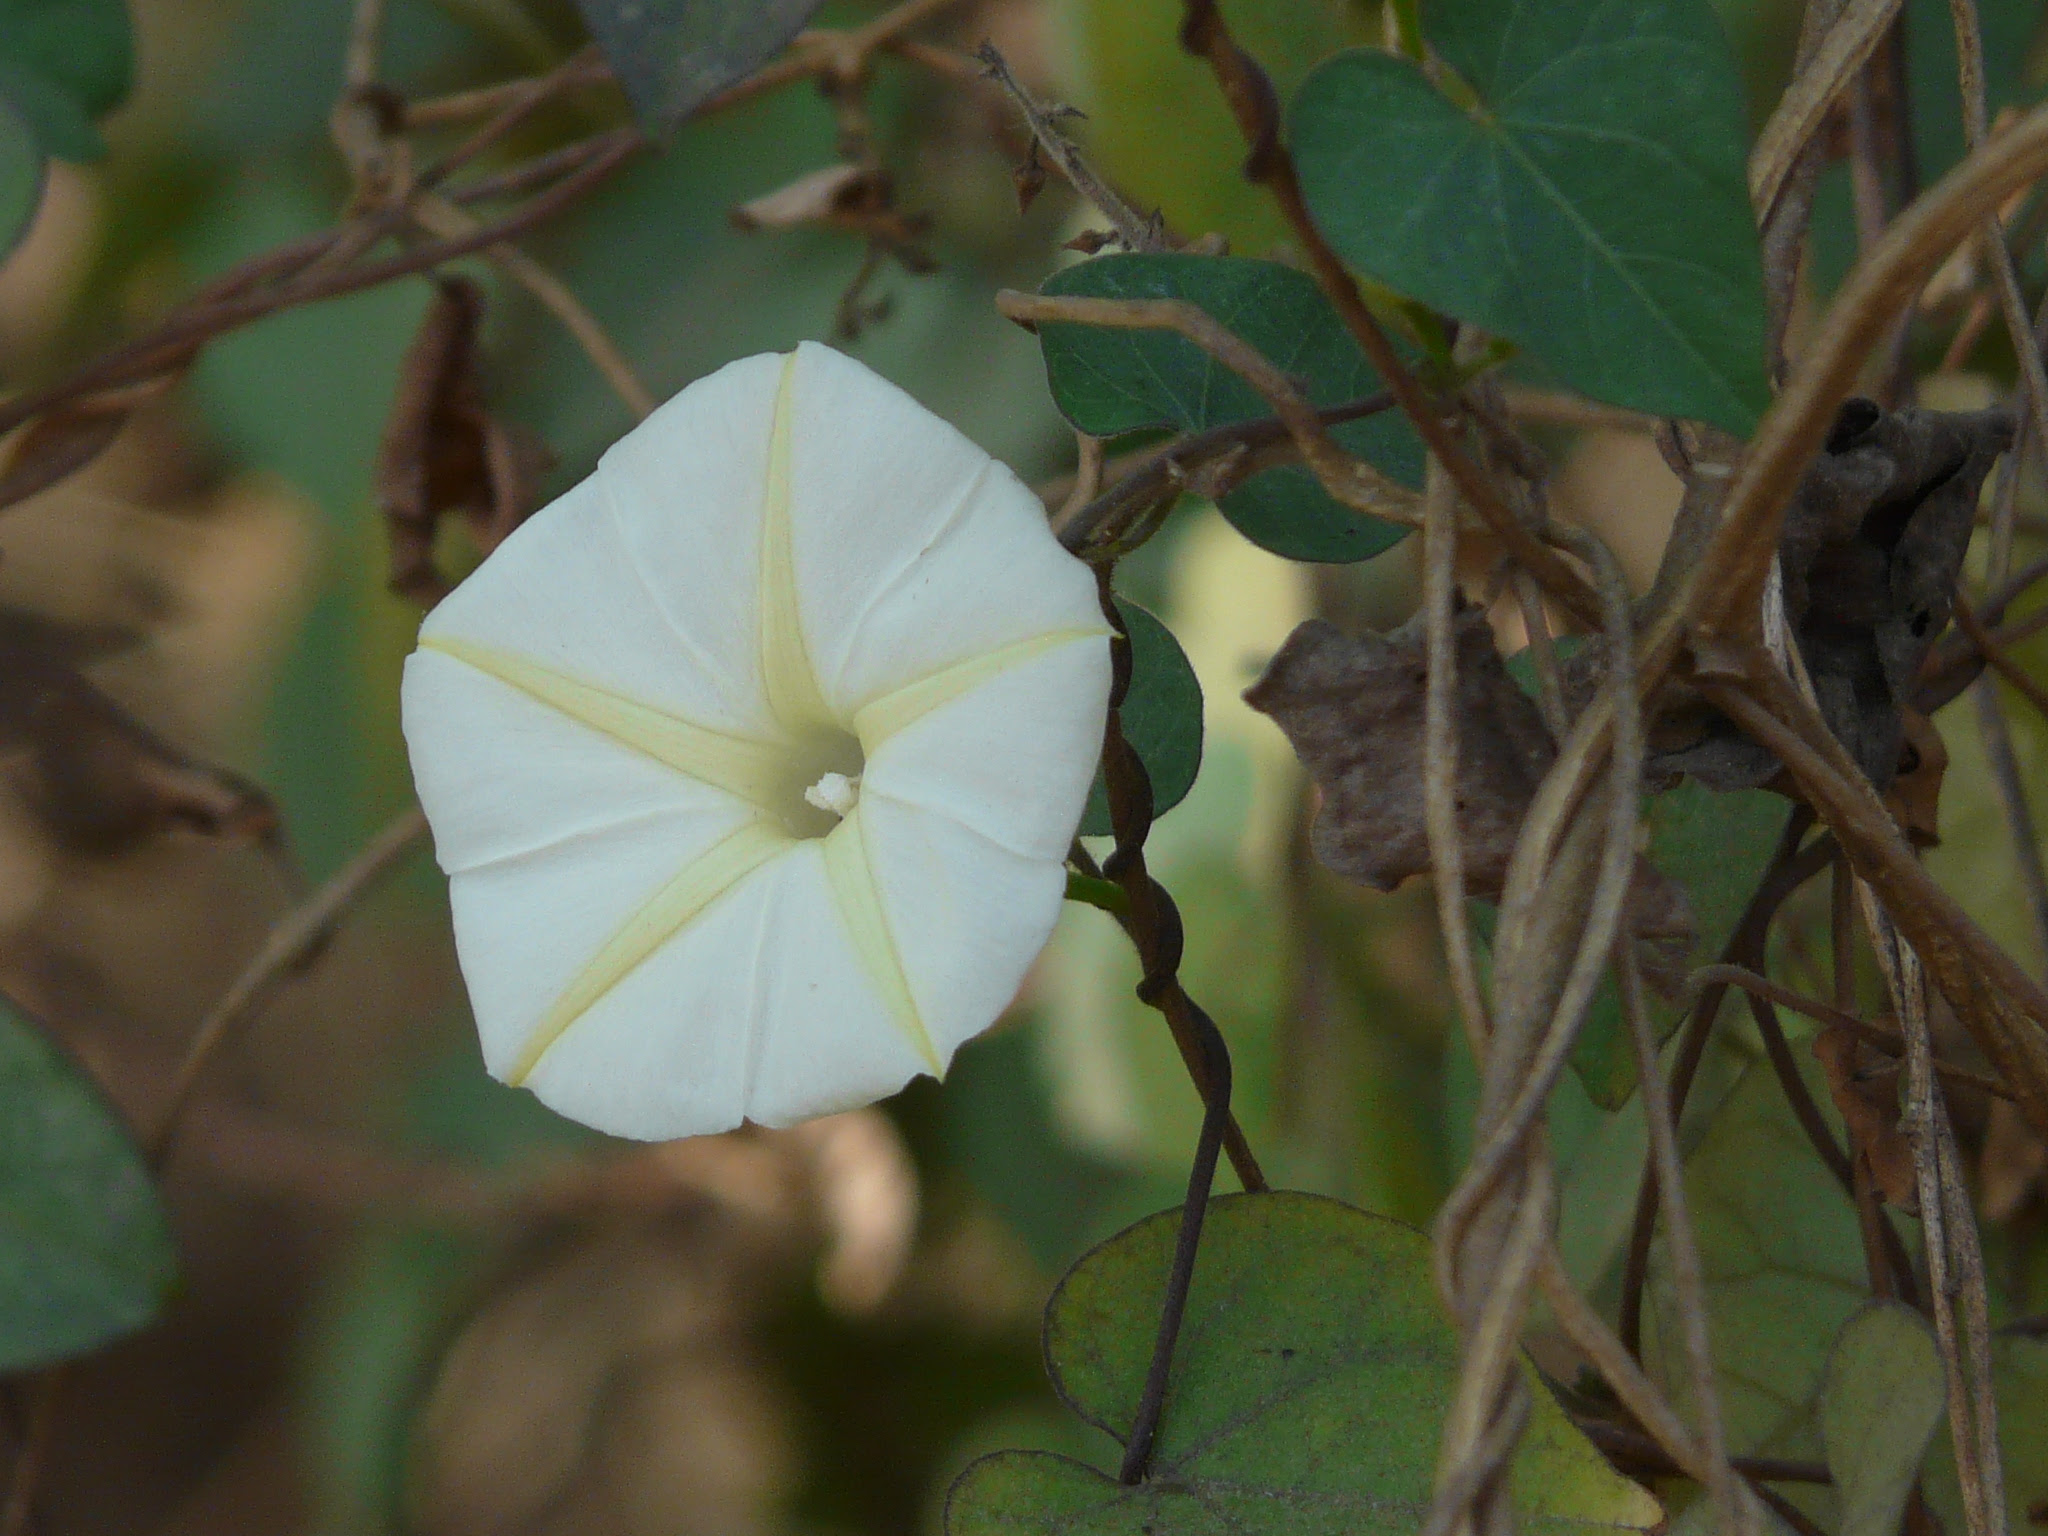 Ipomoea obscura (L.) Ker Gawl.